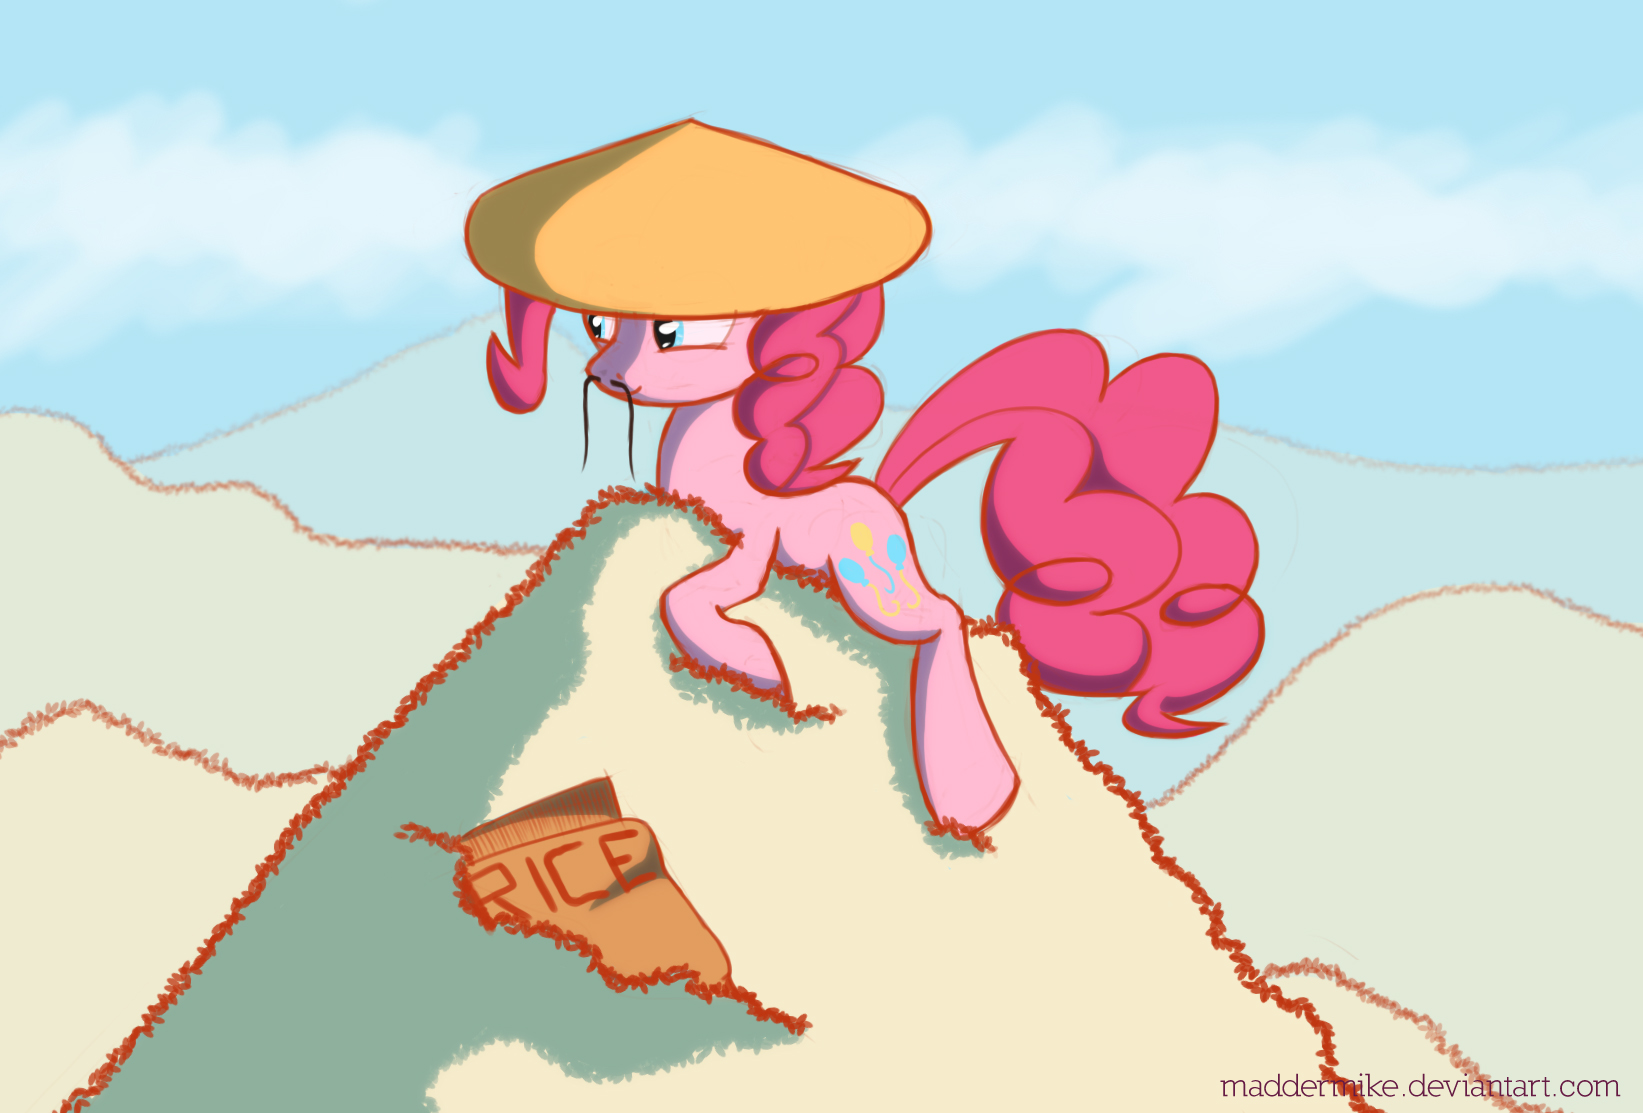 ponka_the_rice_overlord_by_maddermike-d6